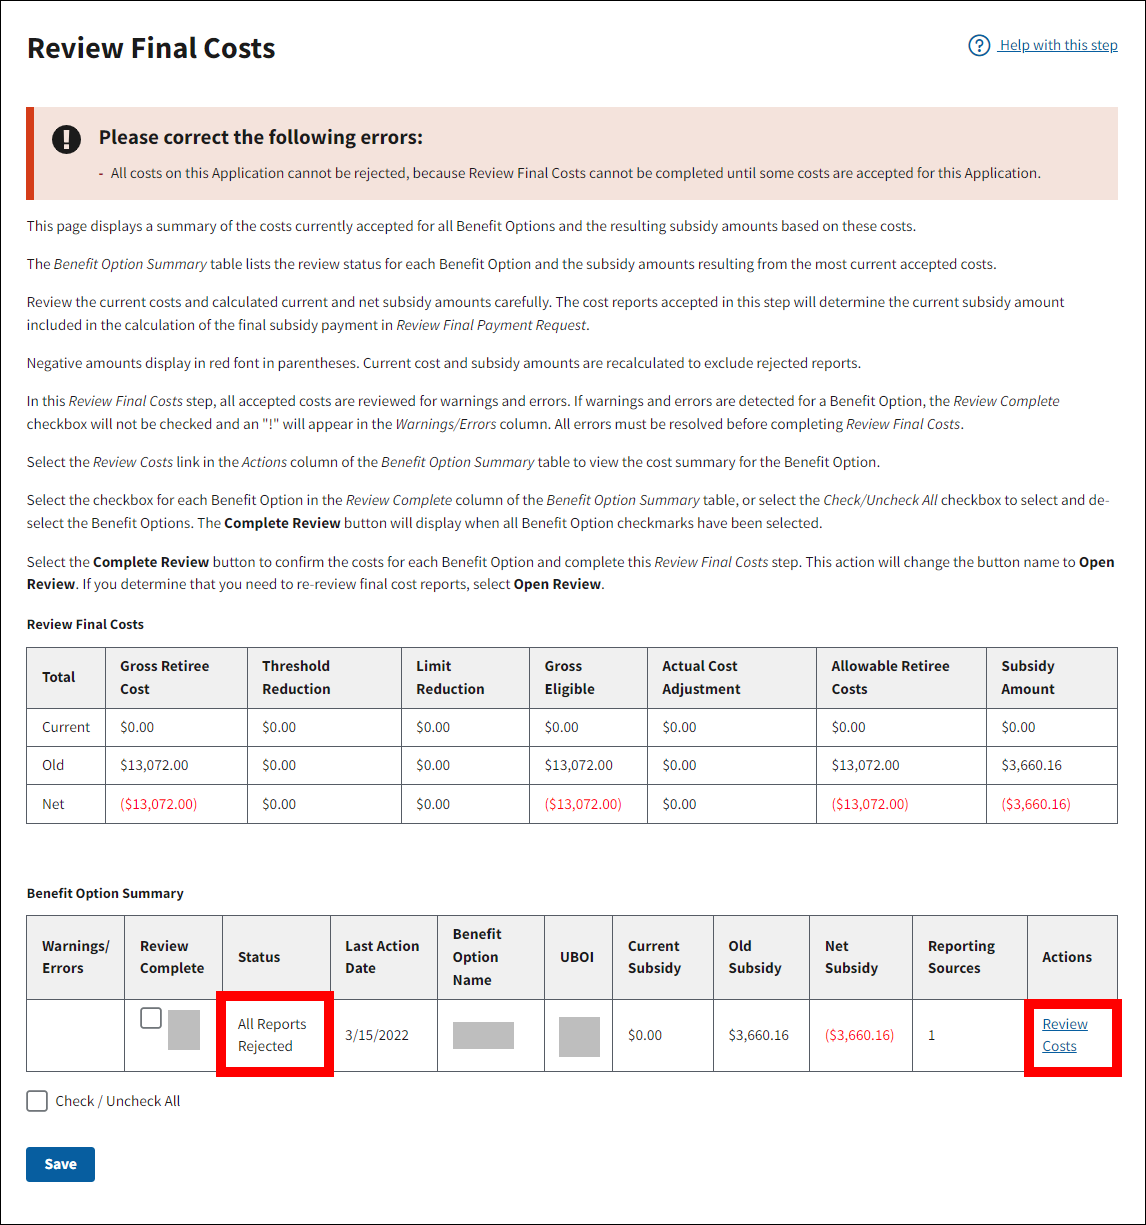 Review Final Costs page with sample data. In the Benefit Option Summary table, Status and Actions are highlighted.